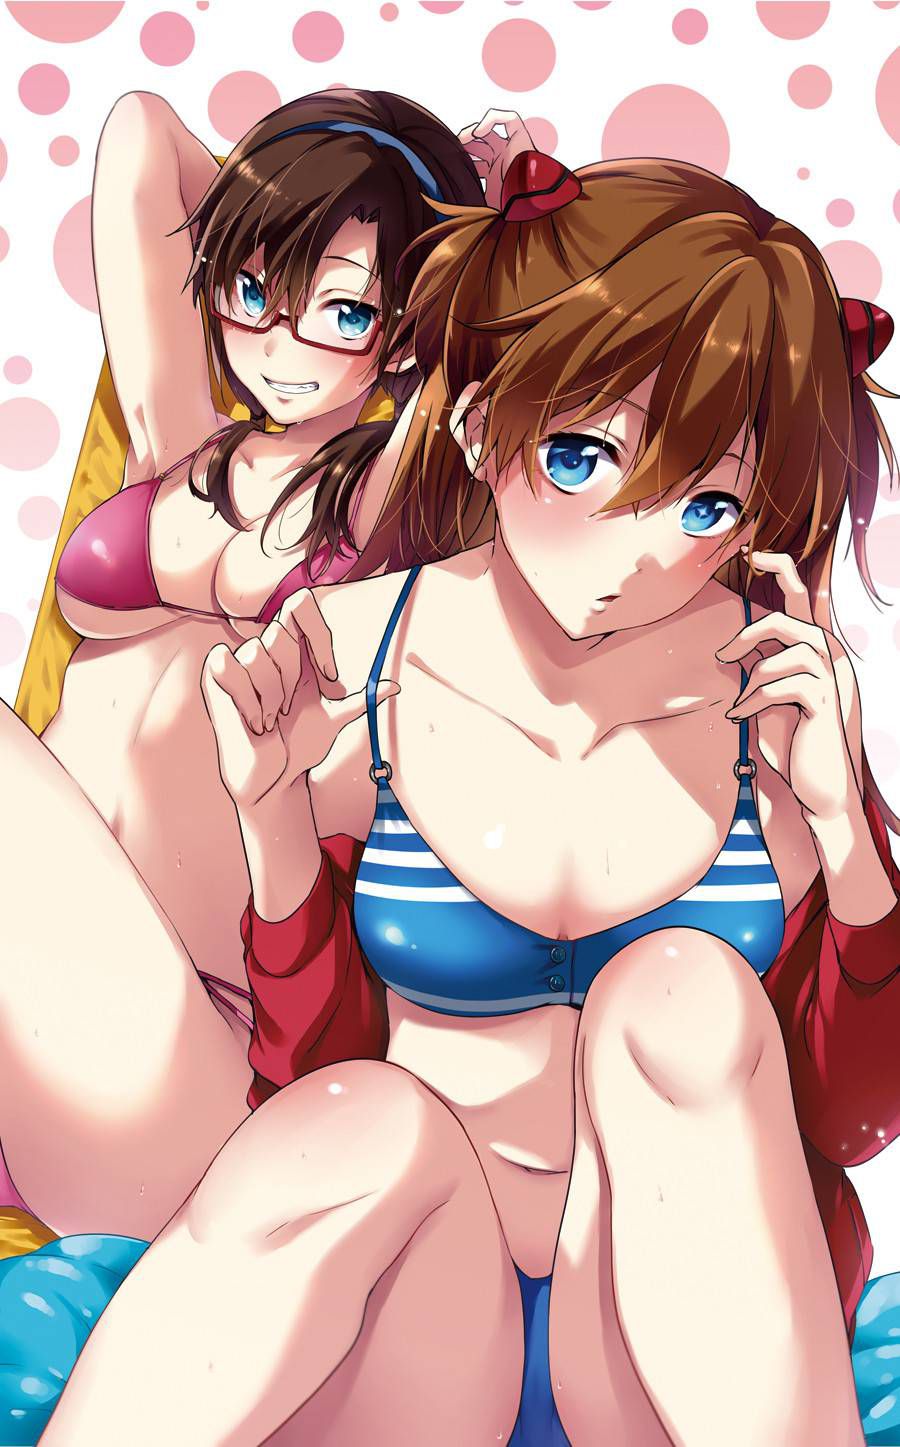 Swimsuits are erotic I can't believe I'm flossing in such a way, just like pants round dashi 19